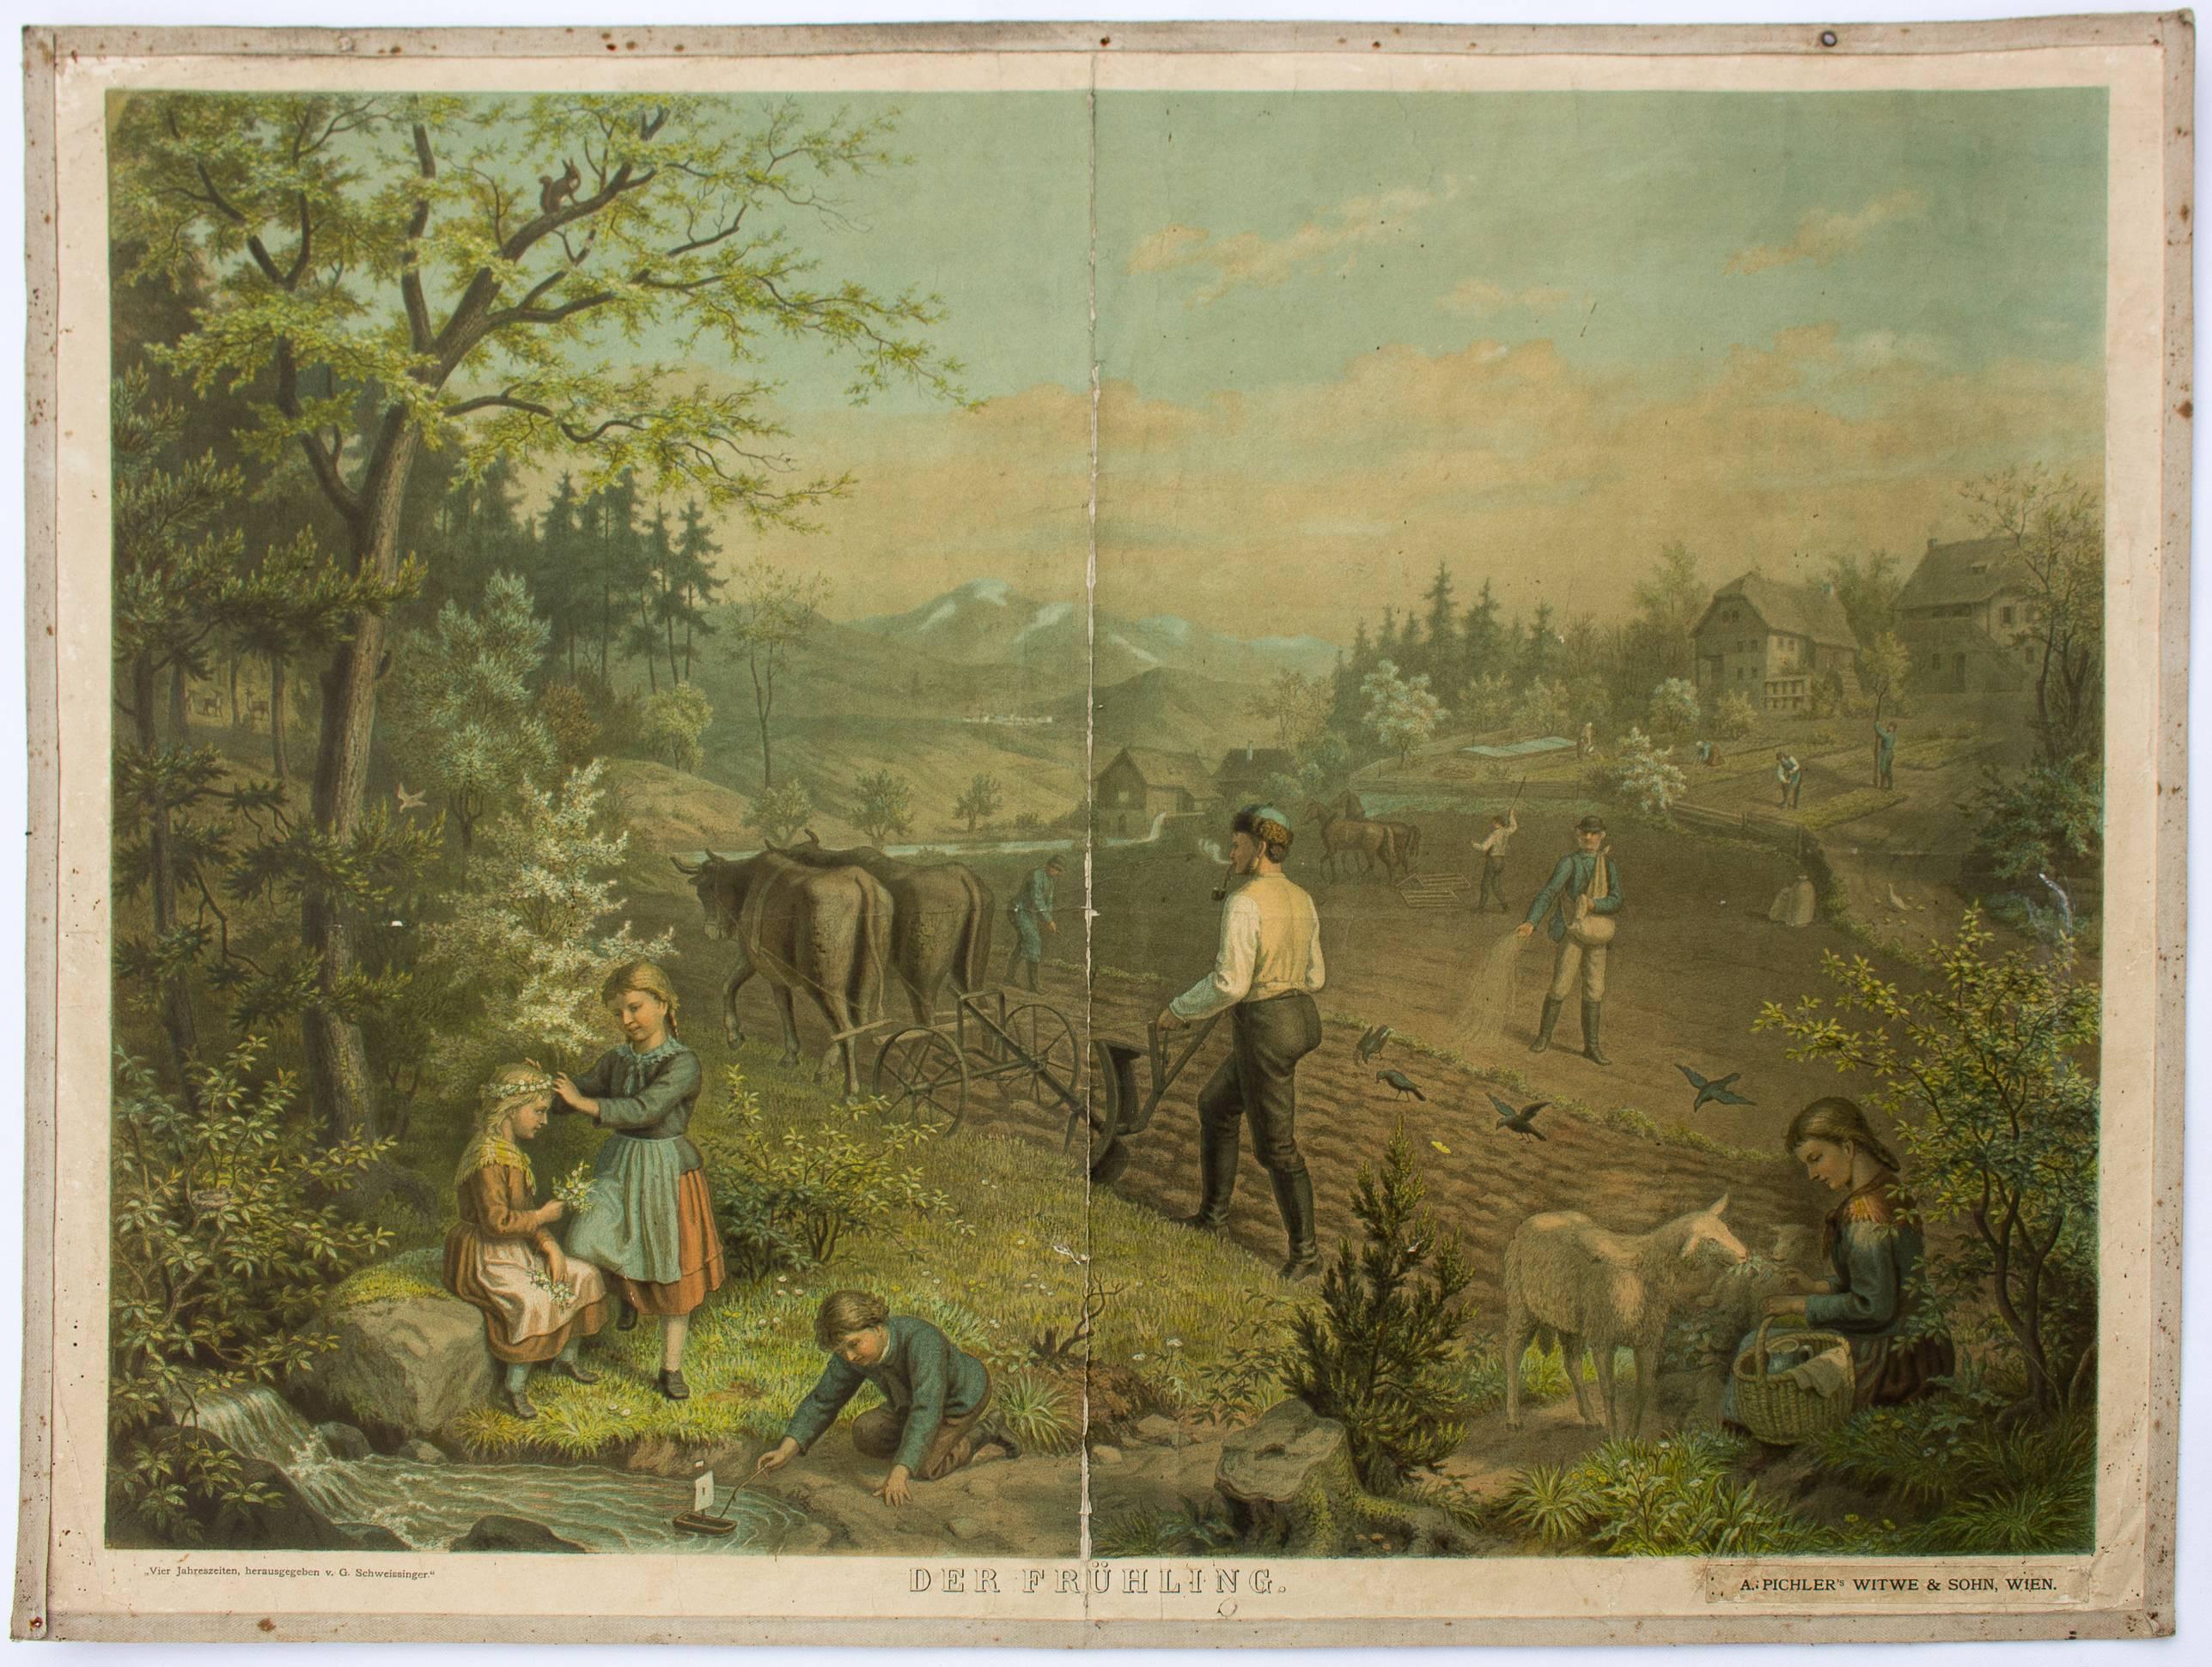 This very rare color lithograph consists of four pictures of the four seasons from 1885 was produced by G. Schweisinger and published by F.E. Wachsmuth, Leipzig.